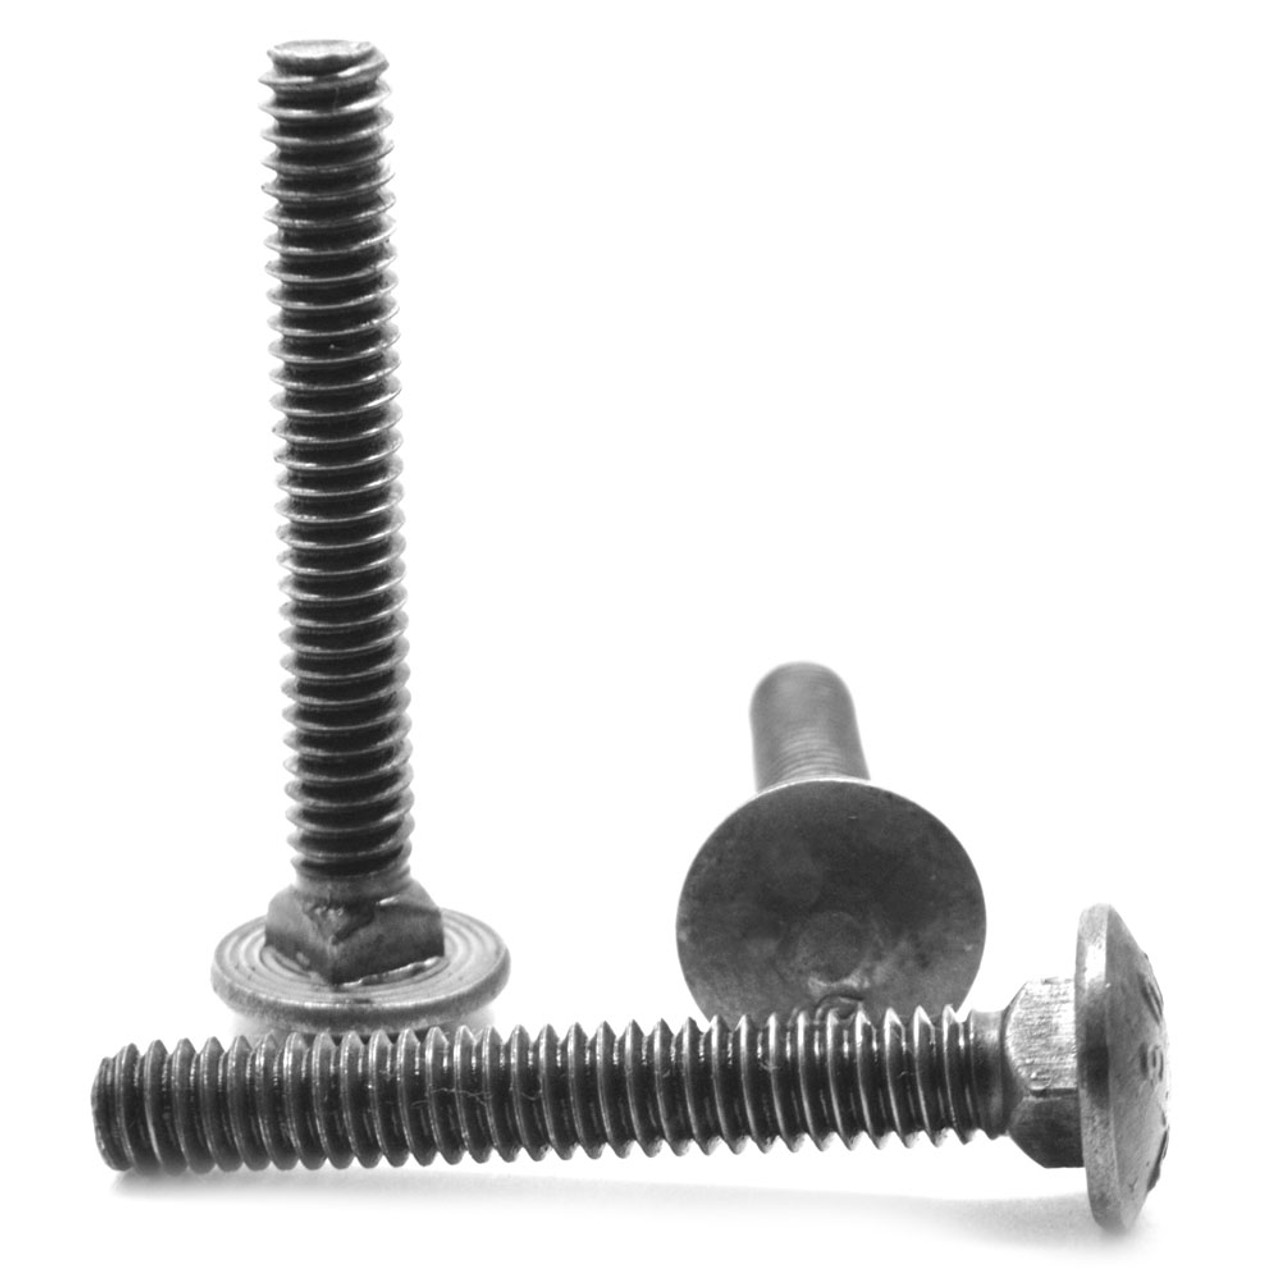 5/8"-11 x 2 1/2" (FT) Coarse Thread A307 Grade A Carriage Bolt Low Carbon Steel Plain Finish